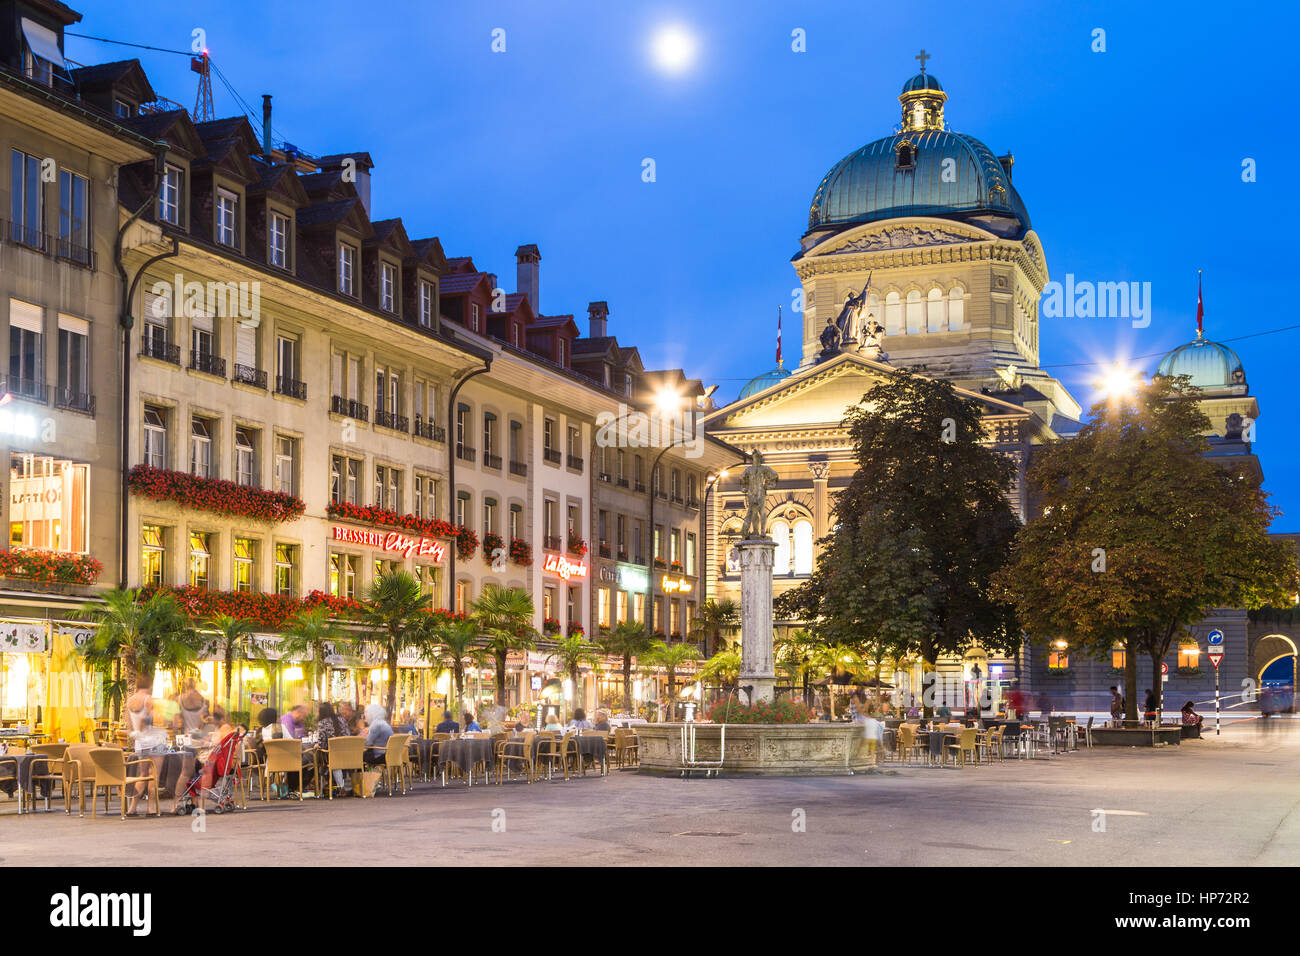 BERN, SIWTZERLAND - SEPTEMBER 12, 2016: People enjoy dinner in restaurants right in front of the Federal Palace in Bern, where seats the Swiss governm Stock Photo